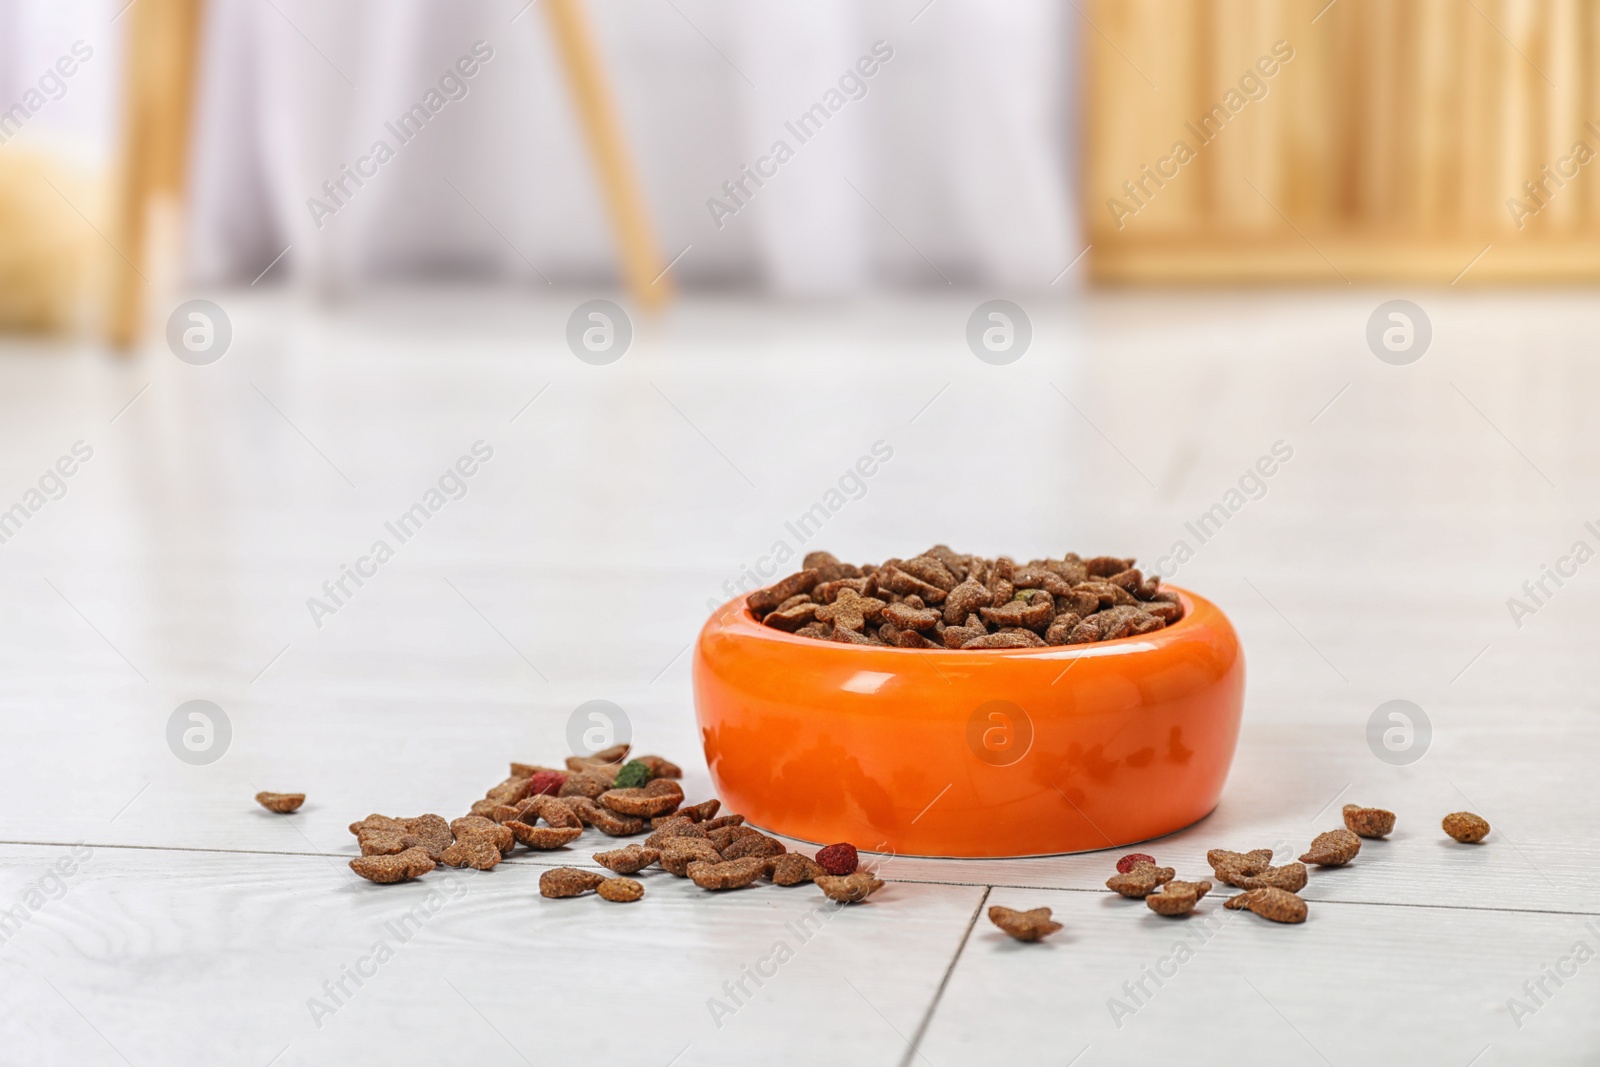 Photo of Bowl with food for cat or dog on floor. Pet care